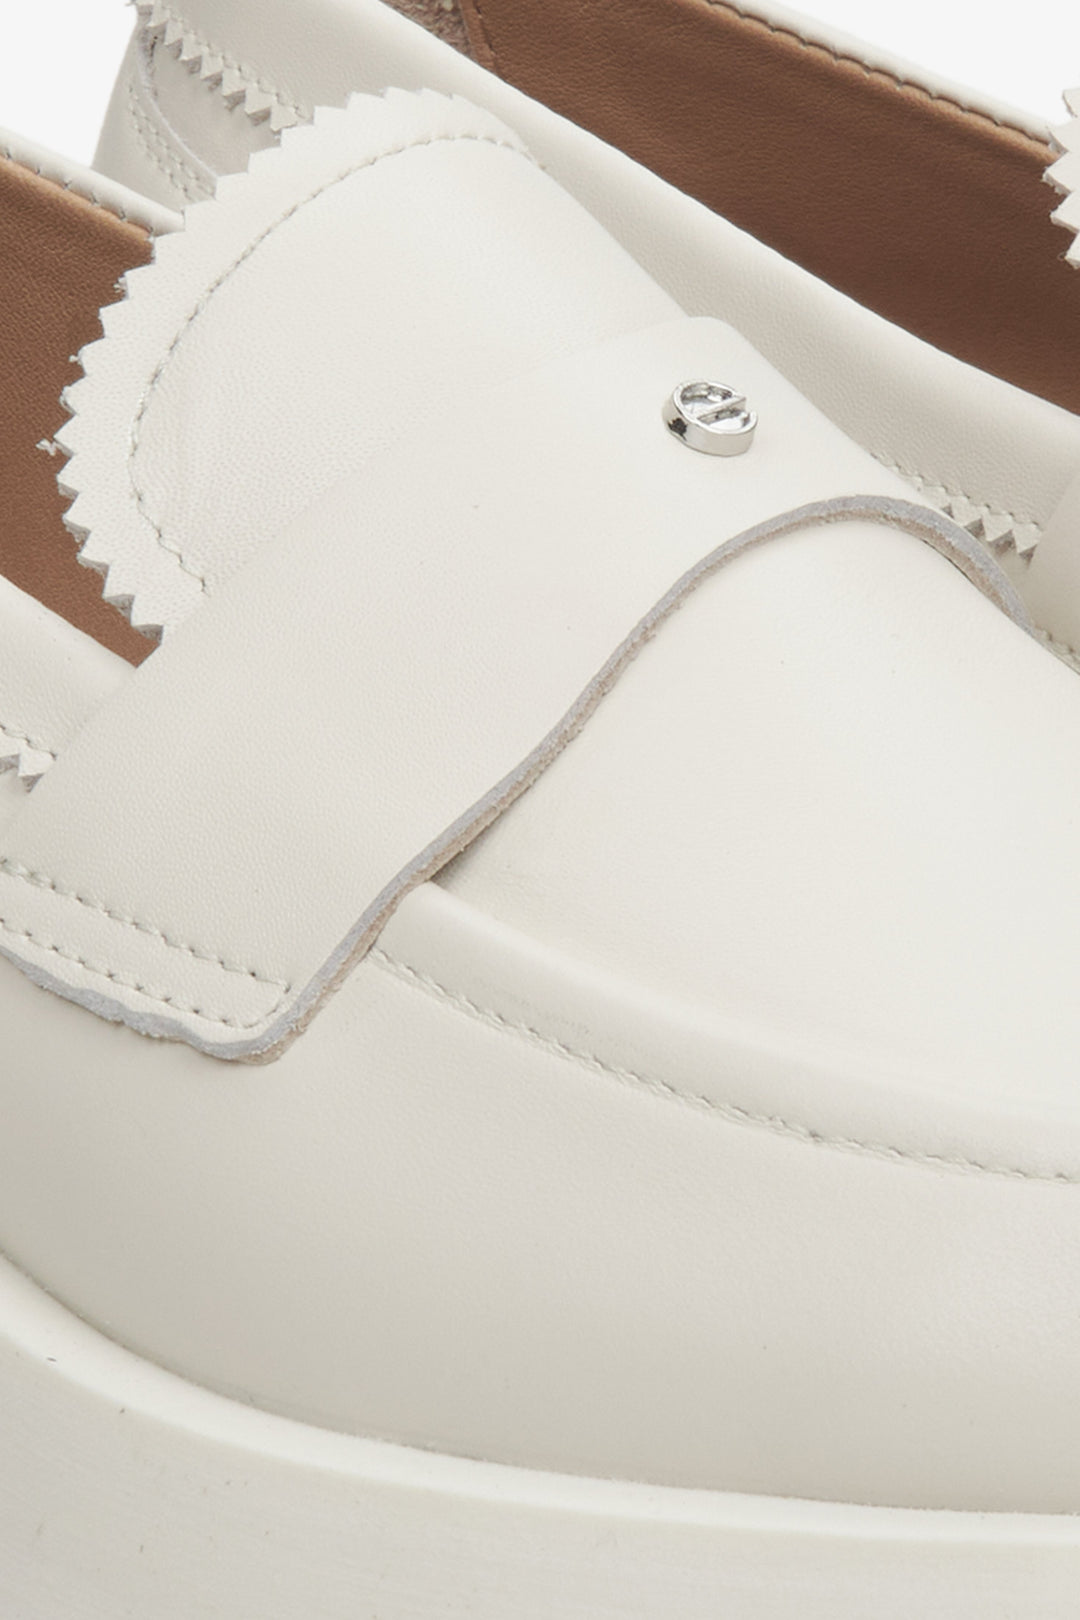 Estro women's loafers in beige, made of genuine leather - close up on details.